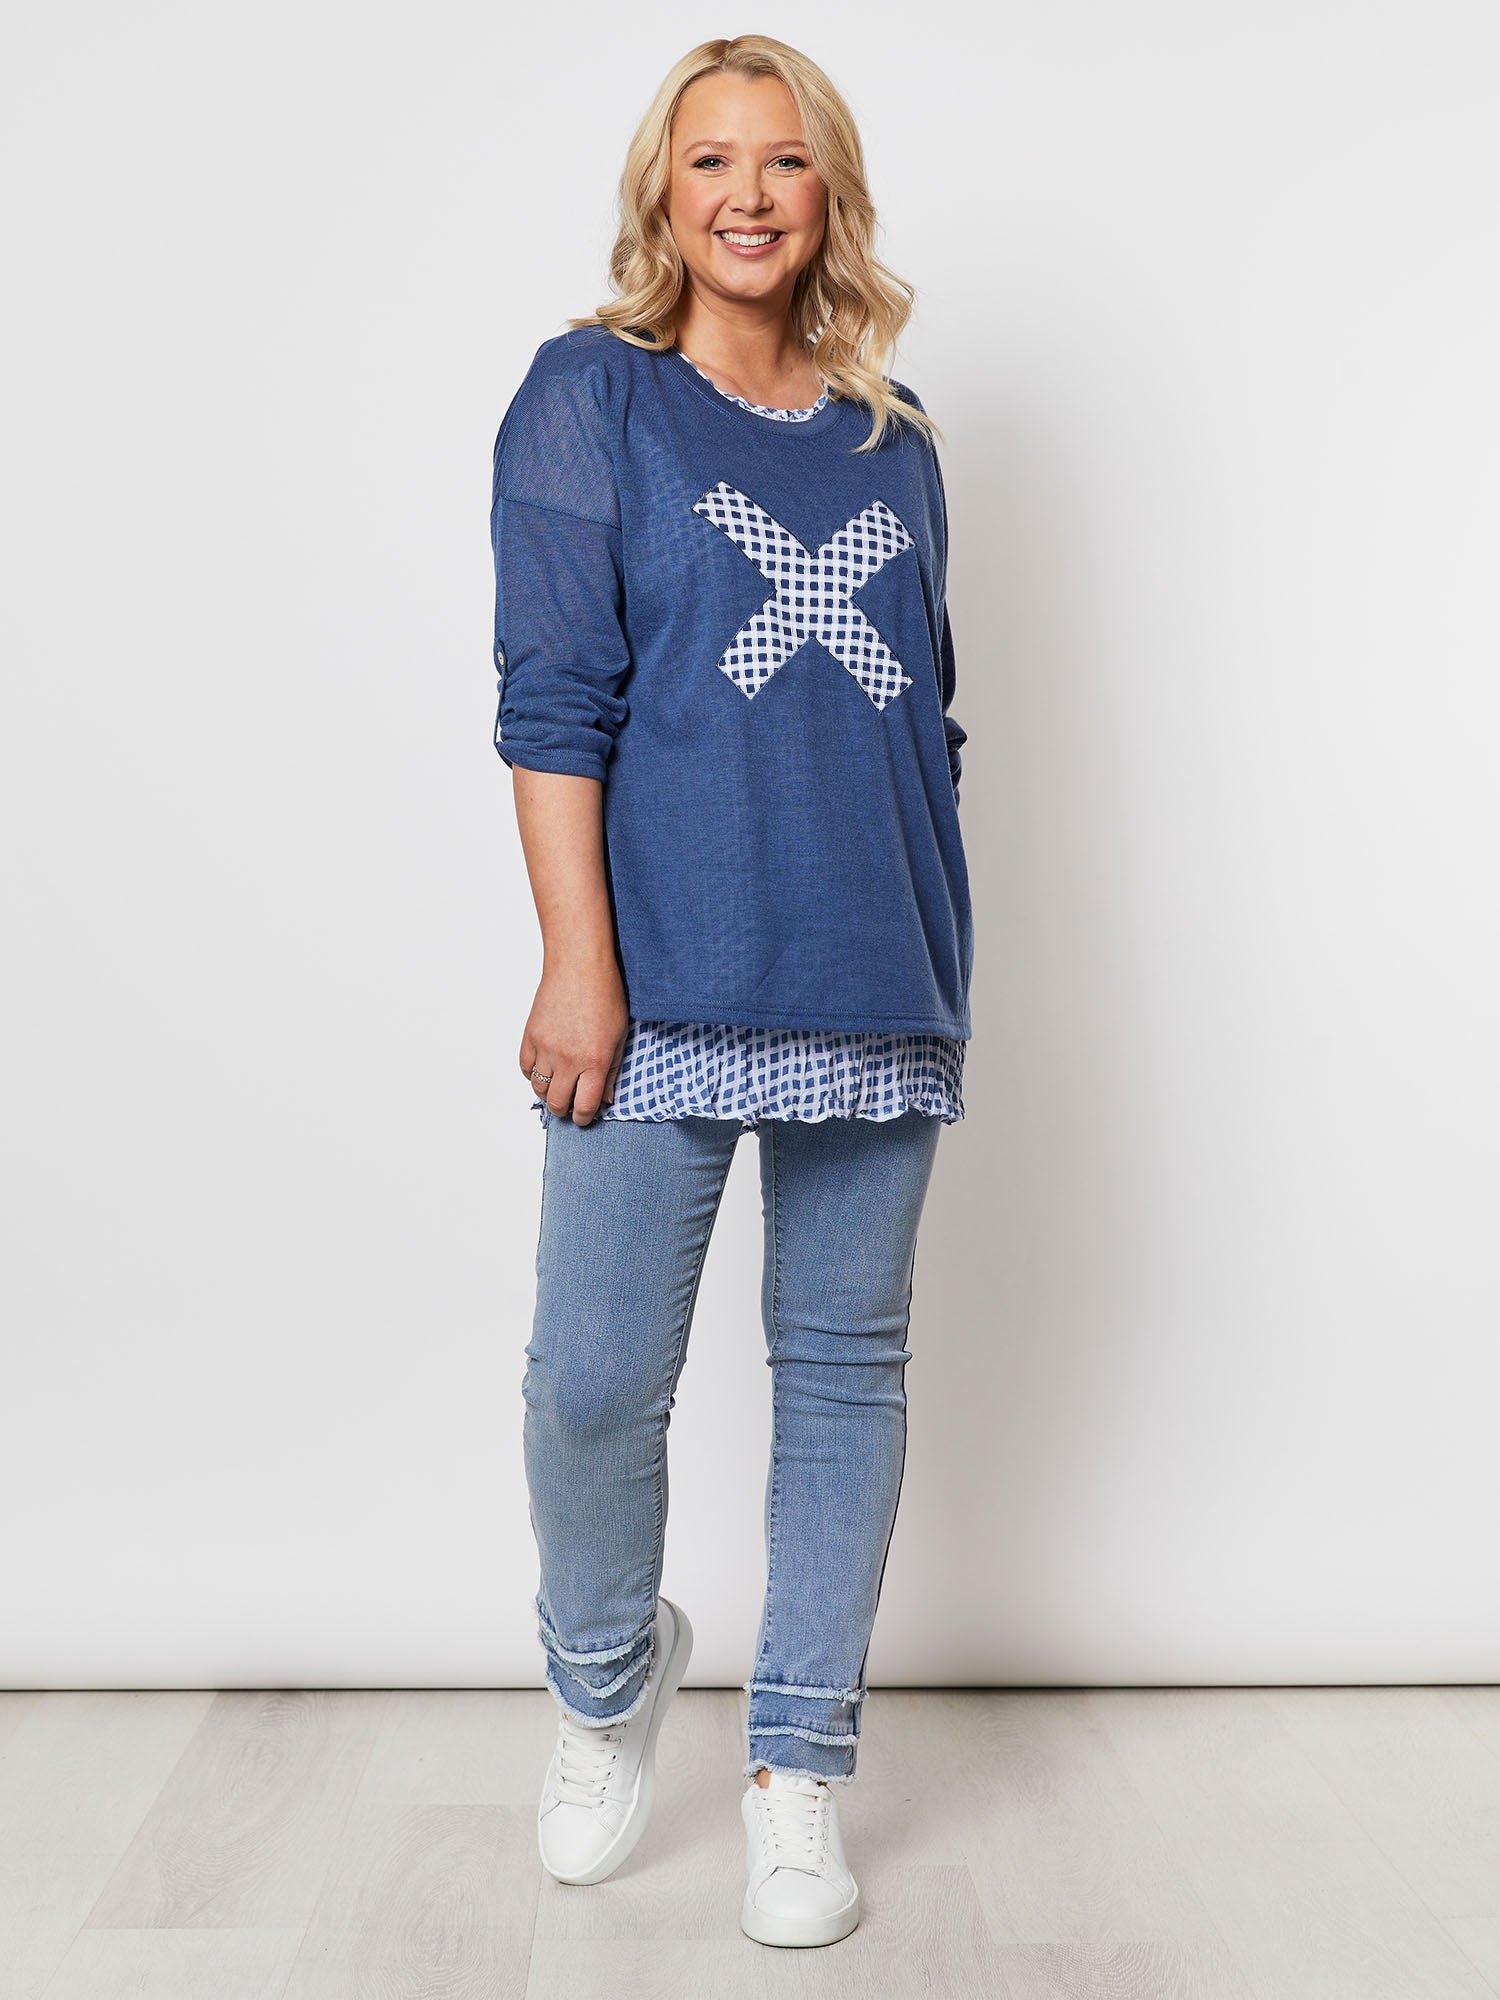 Checked X 2 in 1 Top - Blue